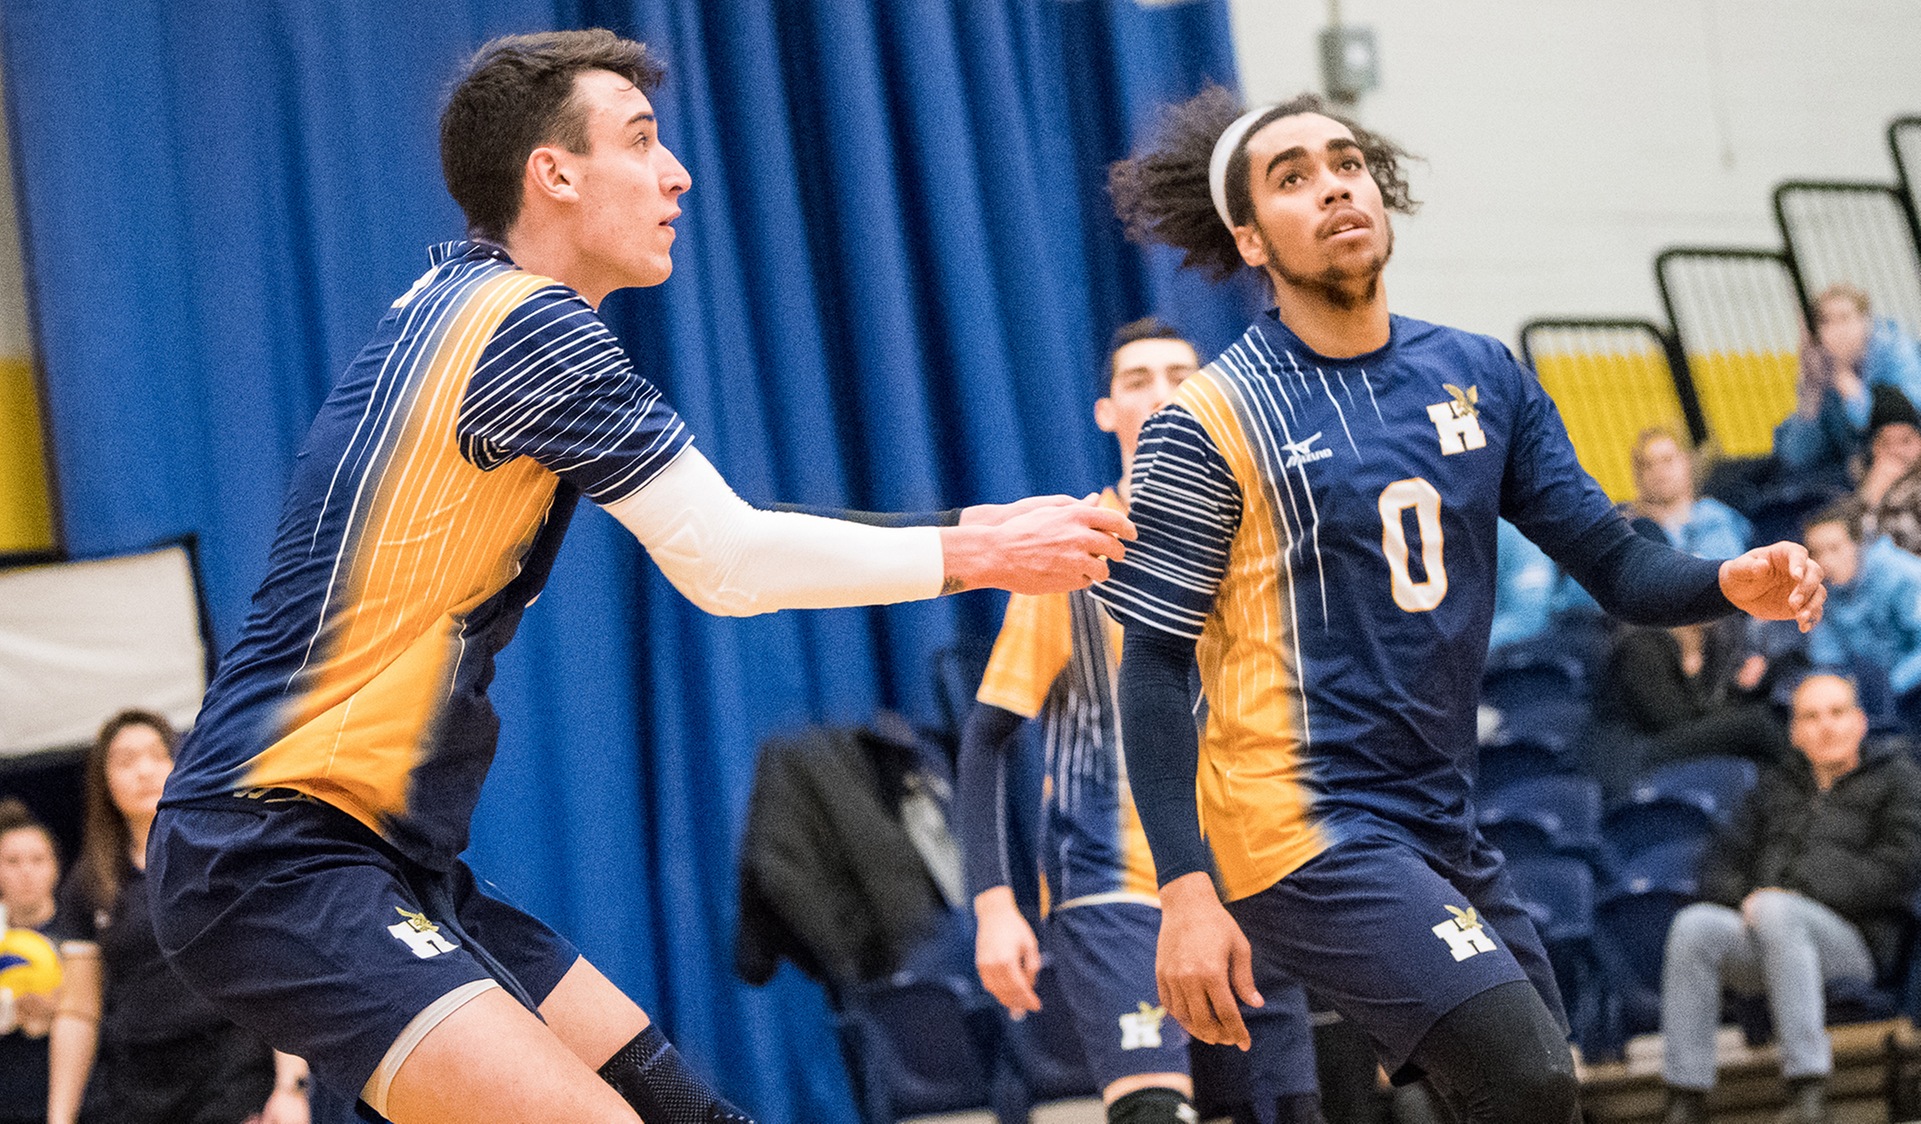 MEN’S VOLLEYBALL TAKE TO THE COURT FOR THREE PRE-SEASON GAMES THIS WEEKEND